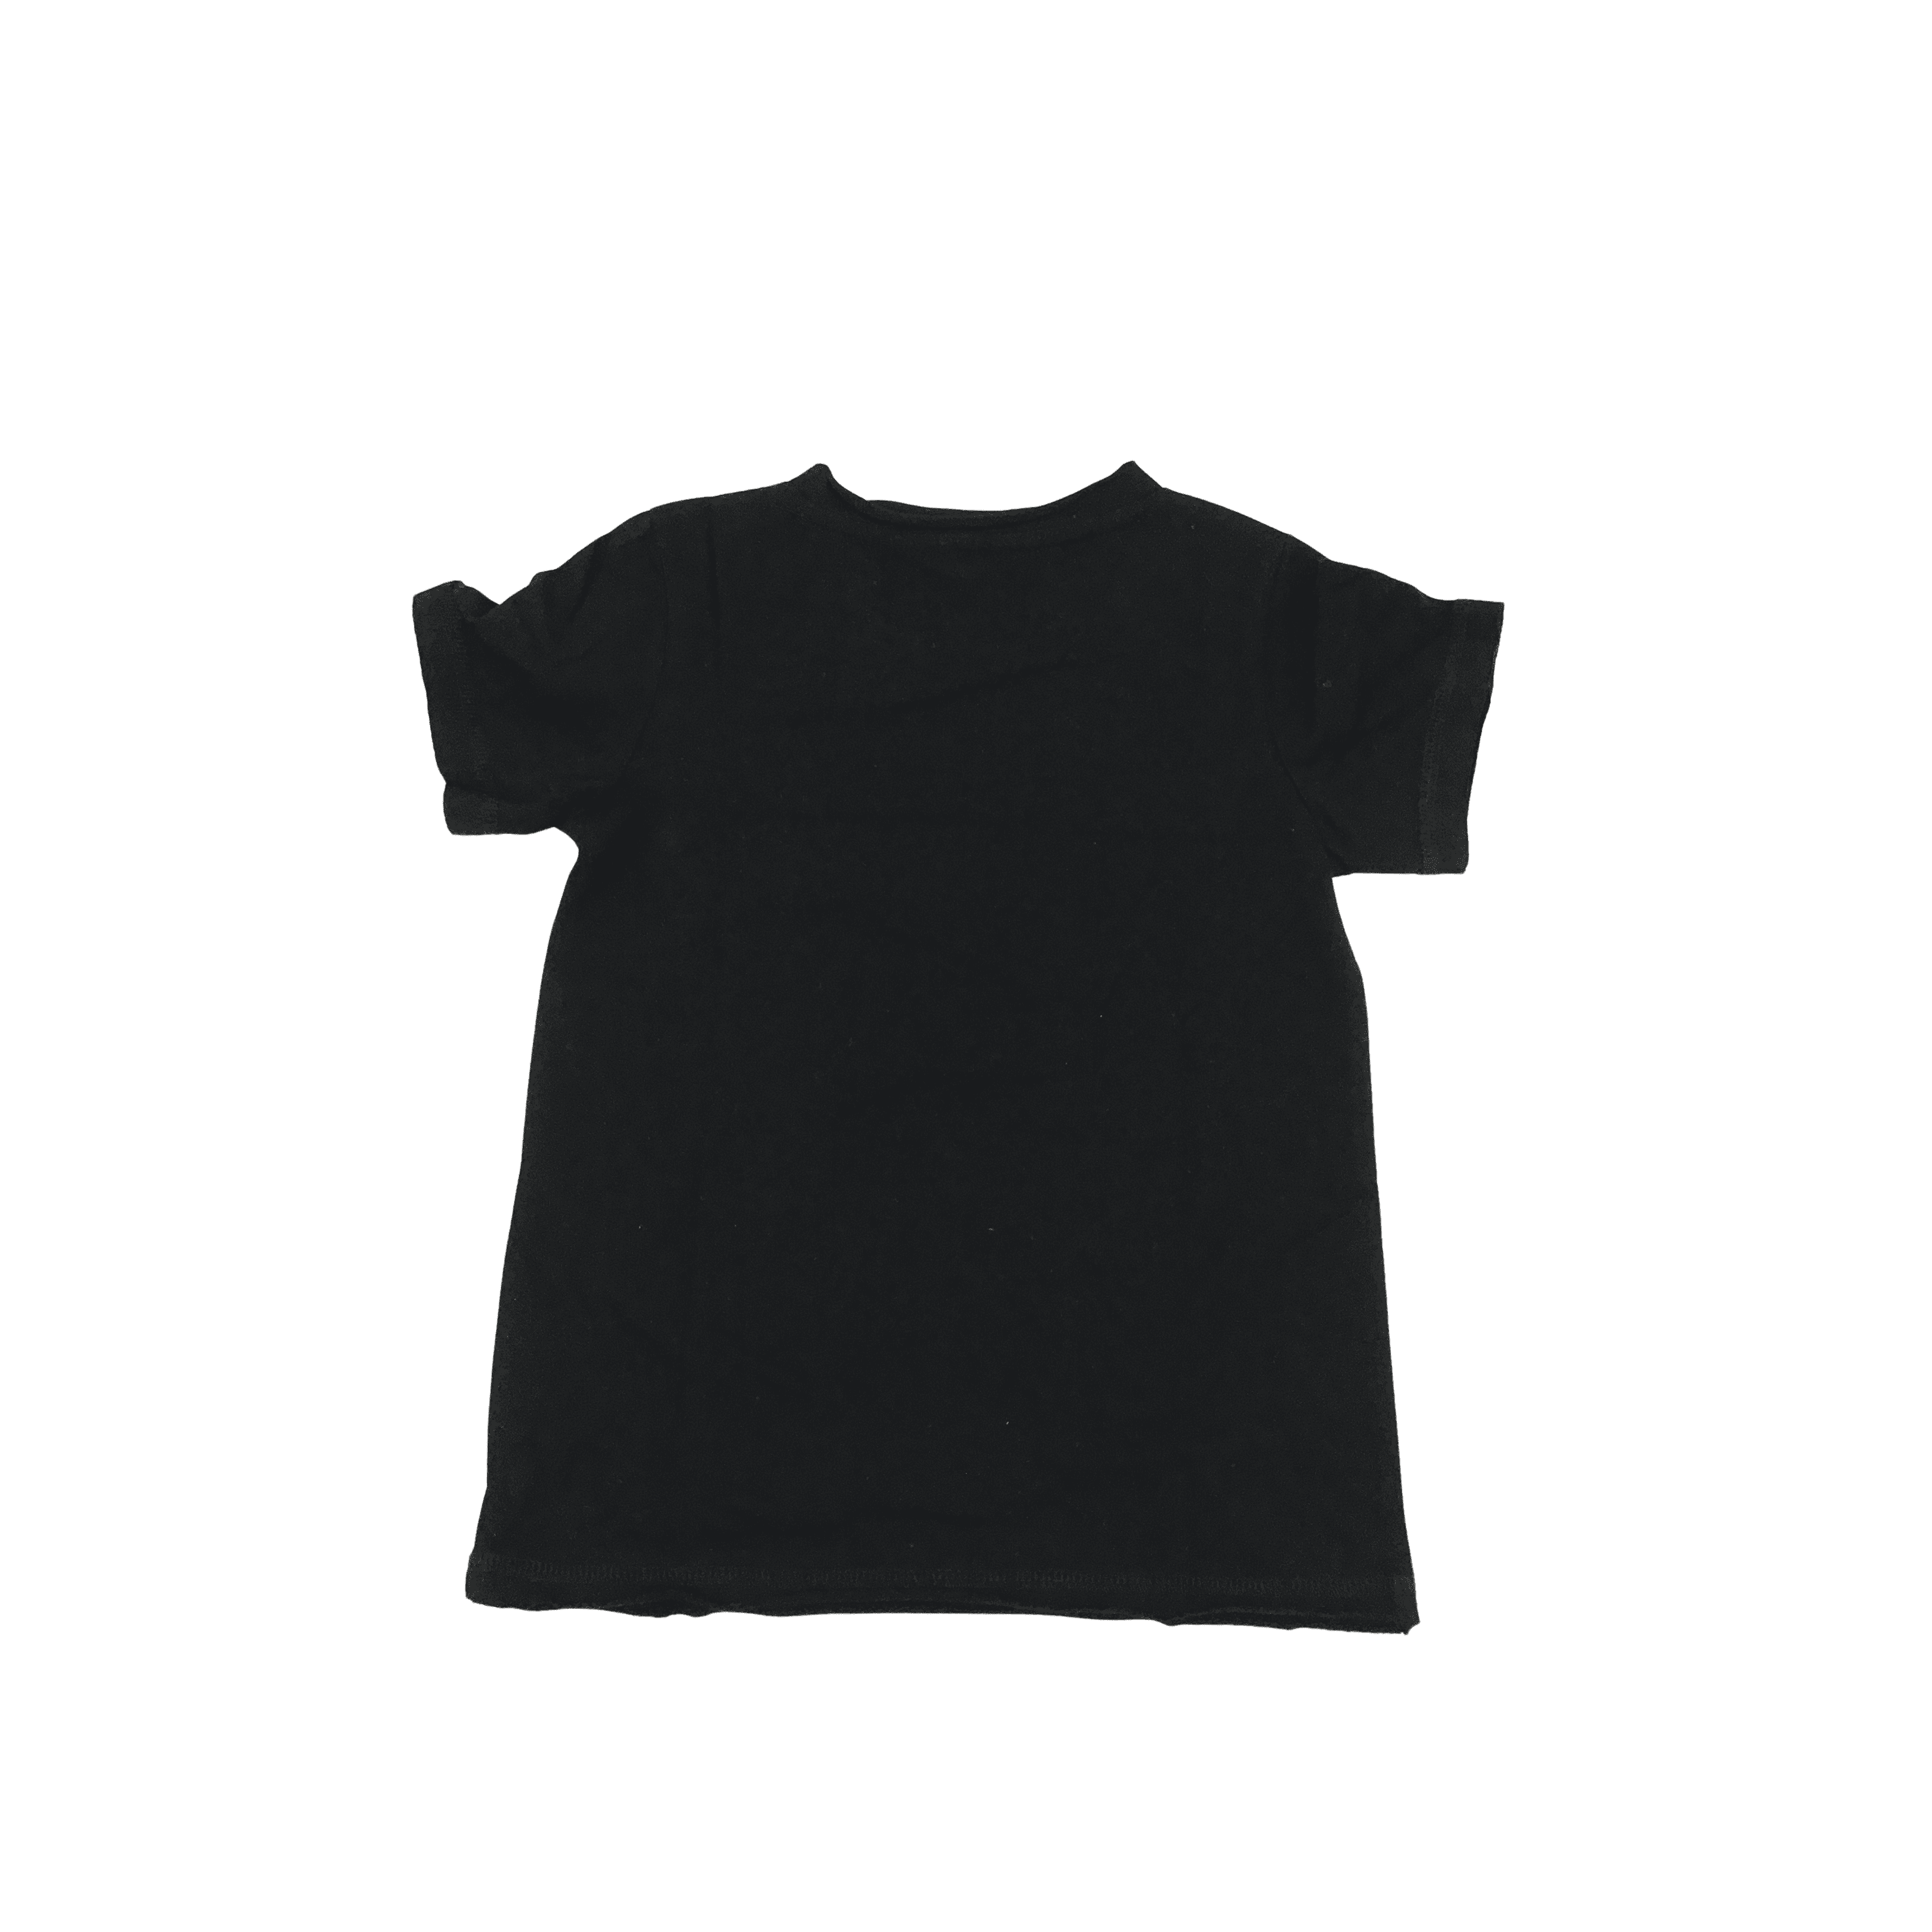 Epic Threads Children's T-Shirt: Black / Future Is Now / Size 5